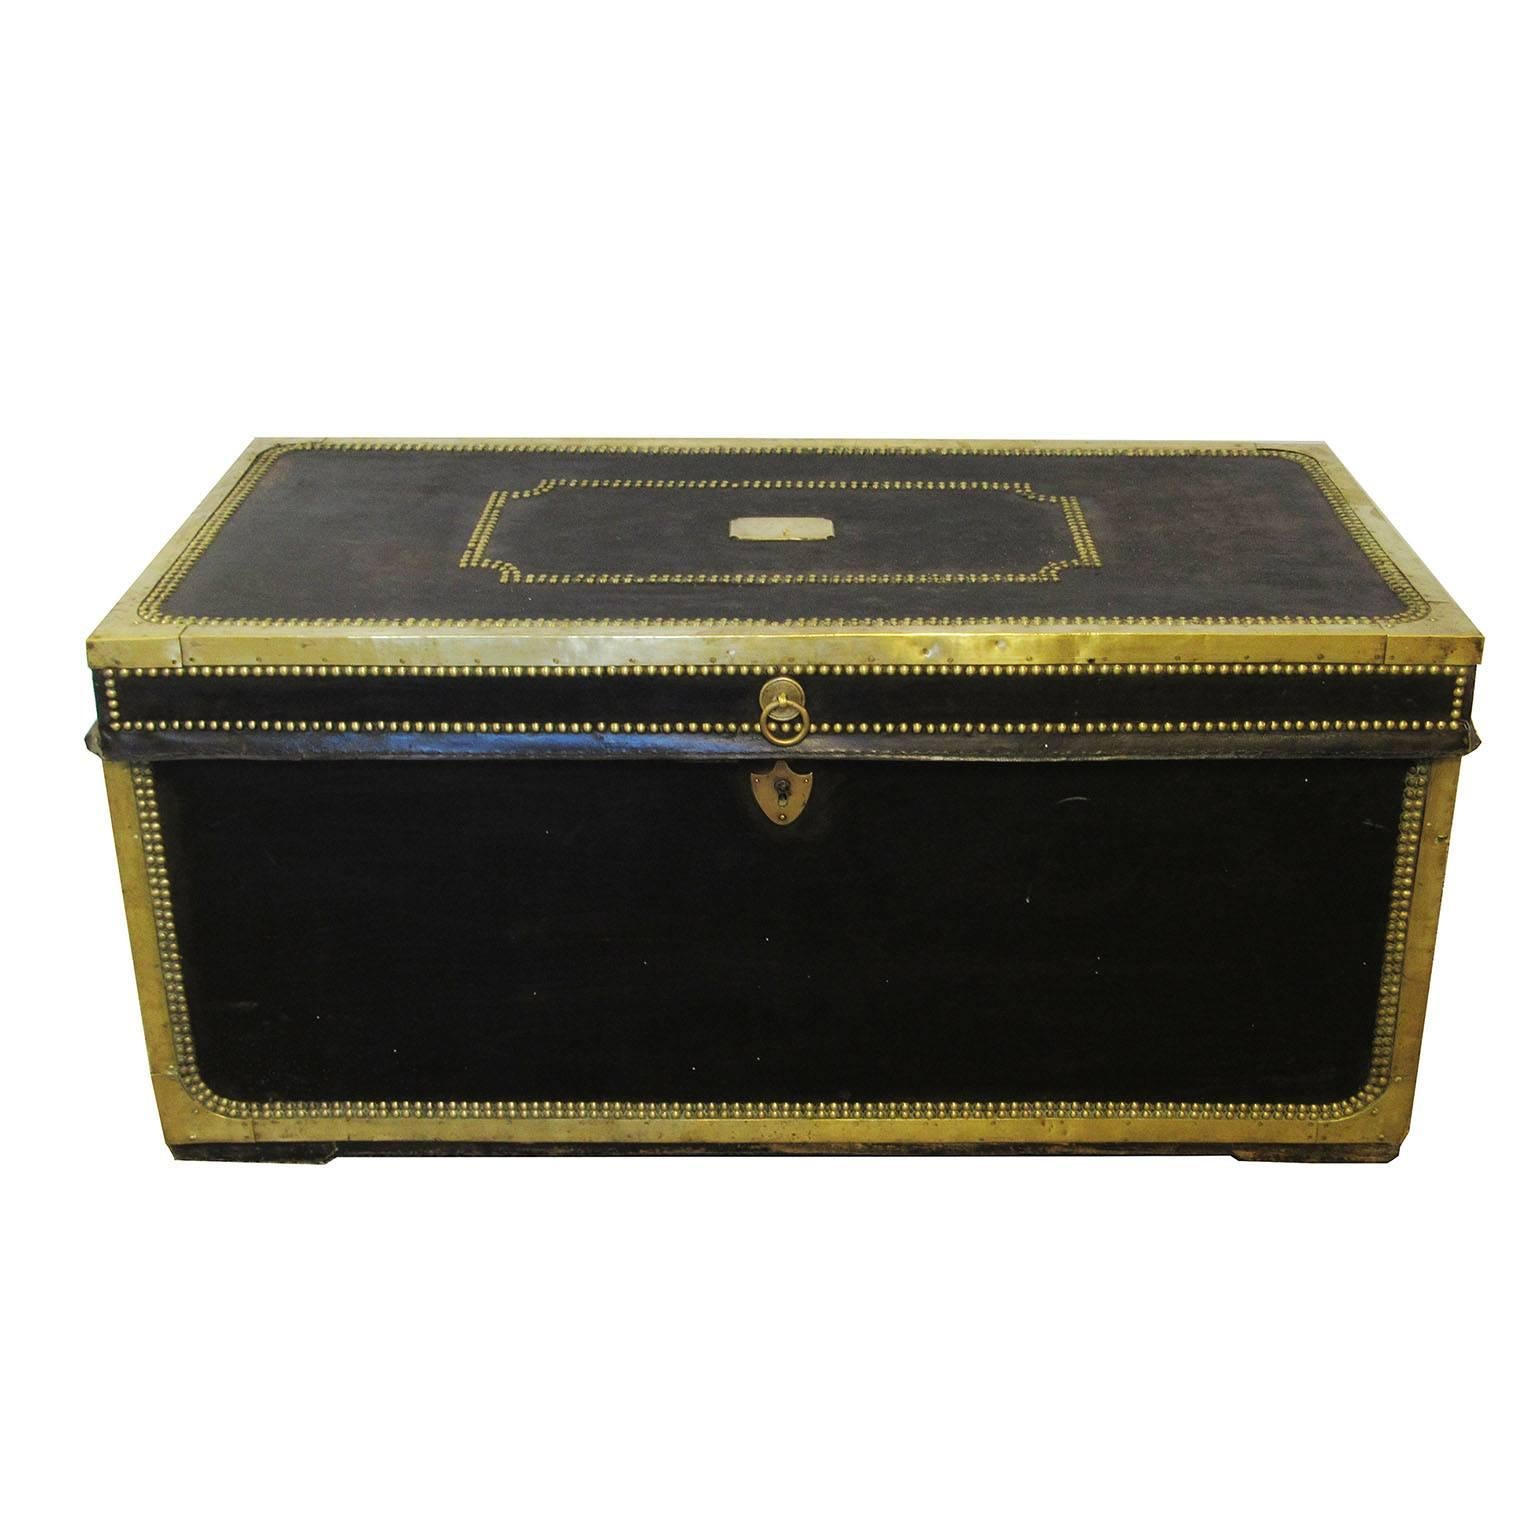 19th century China trade leather and brass banded camphor wood trunk, with studded decoration, two carrying handles and a brass plaque engraved 